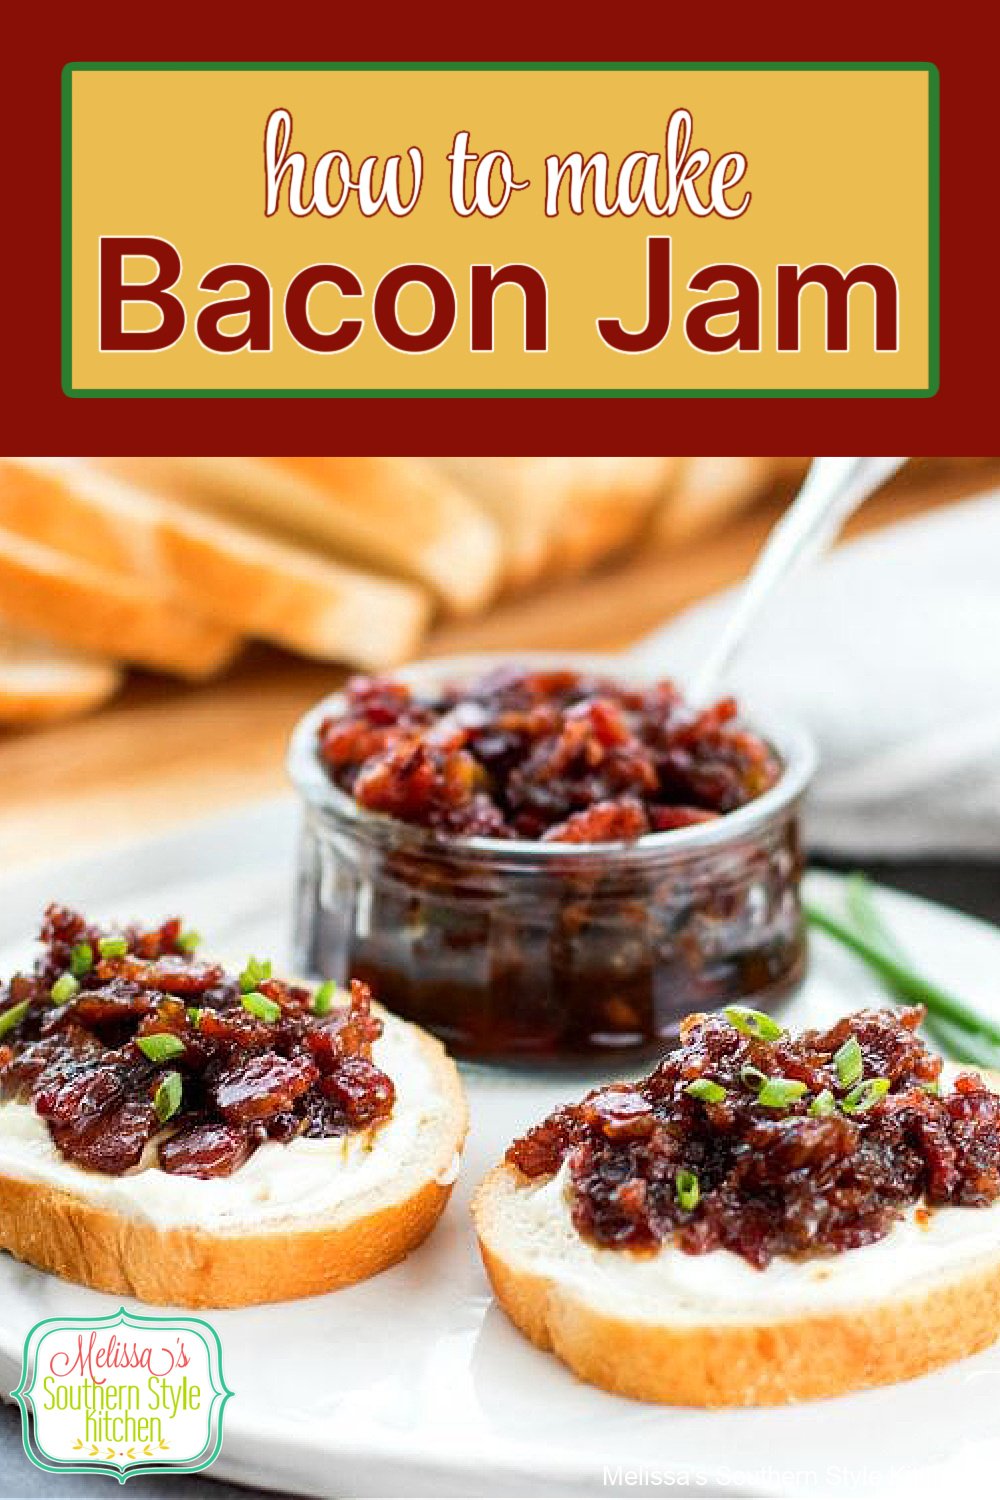 Enjoy this sweet and smoky Bacon Jam on burgers, as a spread, on hot buttermilk biscuits or warm goat cheese as an unforgettable appetizer #baconjam #bacon #jamrecipes #jam #baconrecipes #breakfast #brunch #holidqayrecipes #appetizers #dips #snacks via @melissasssk